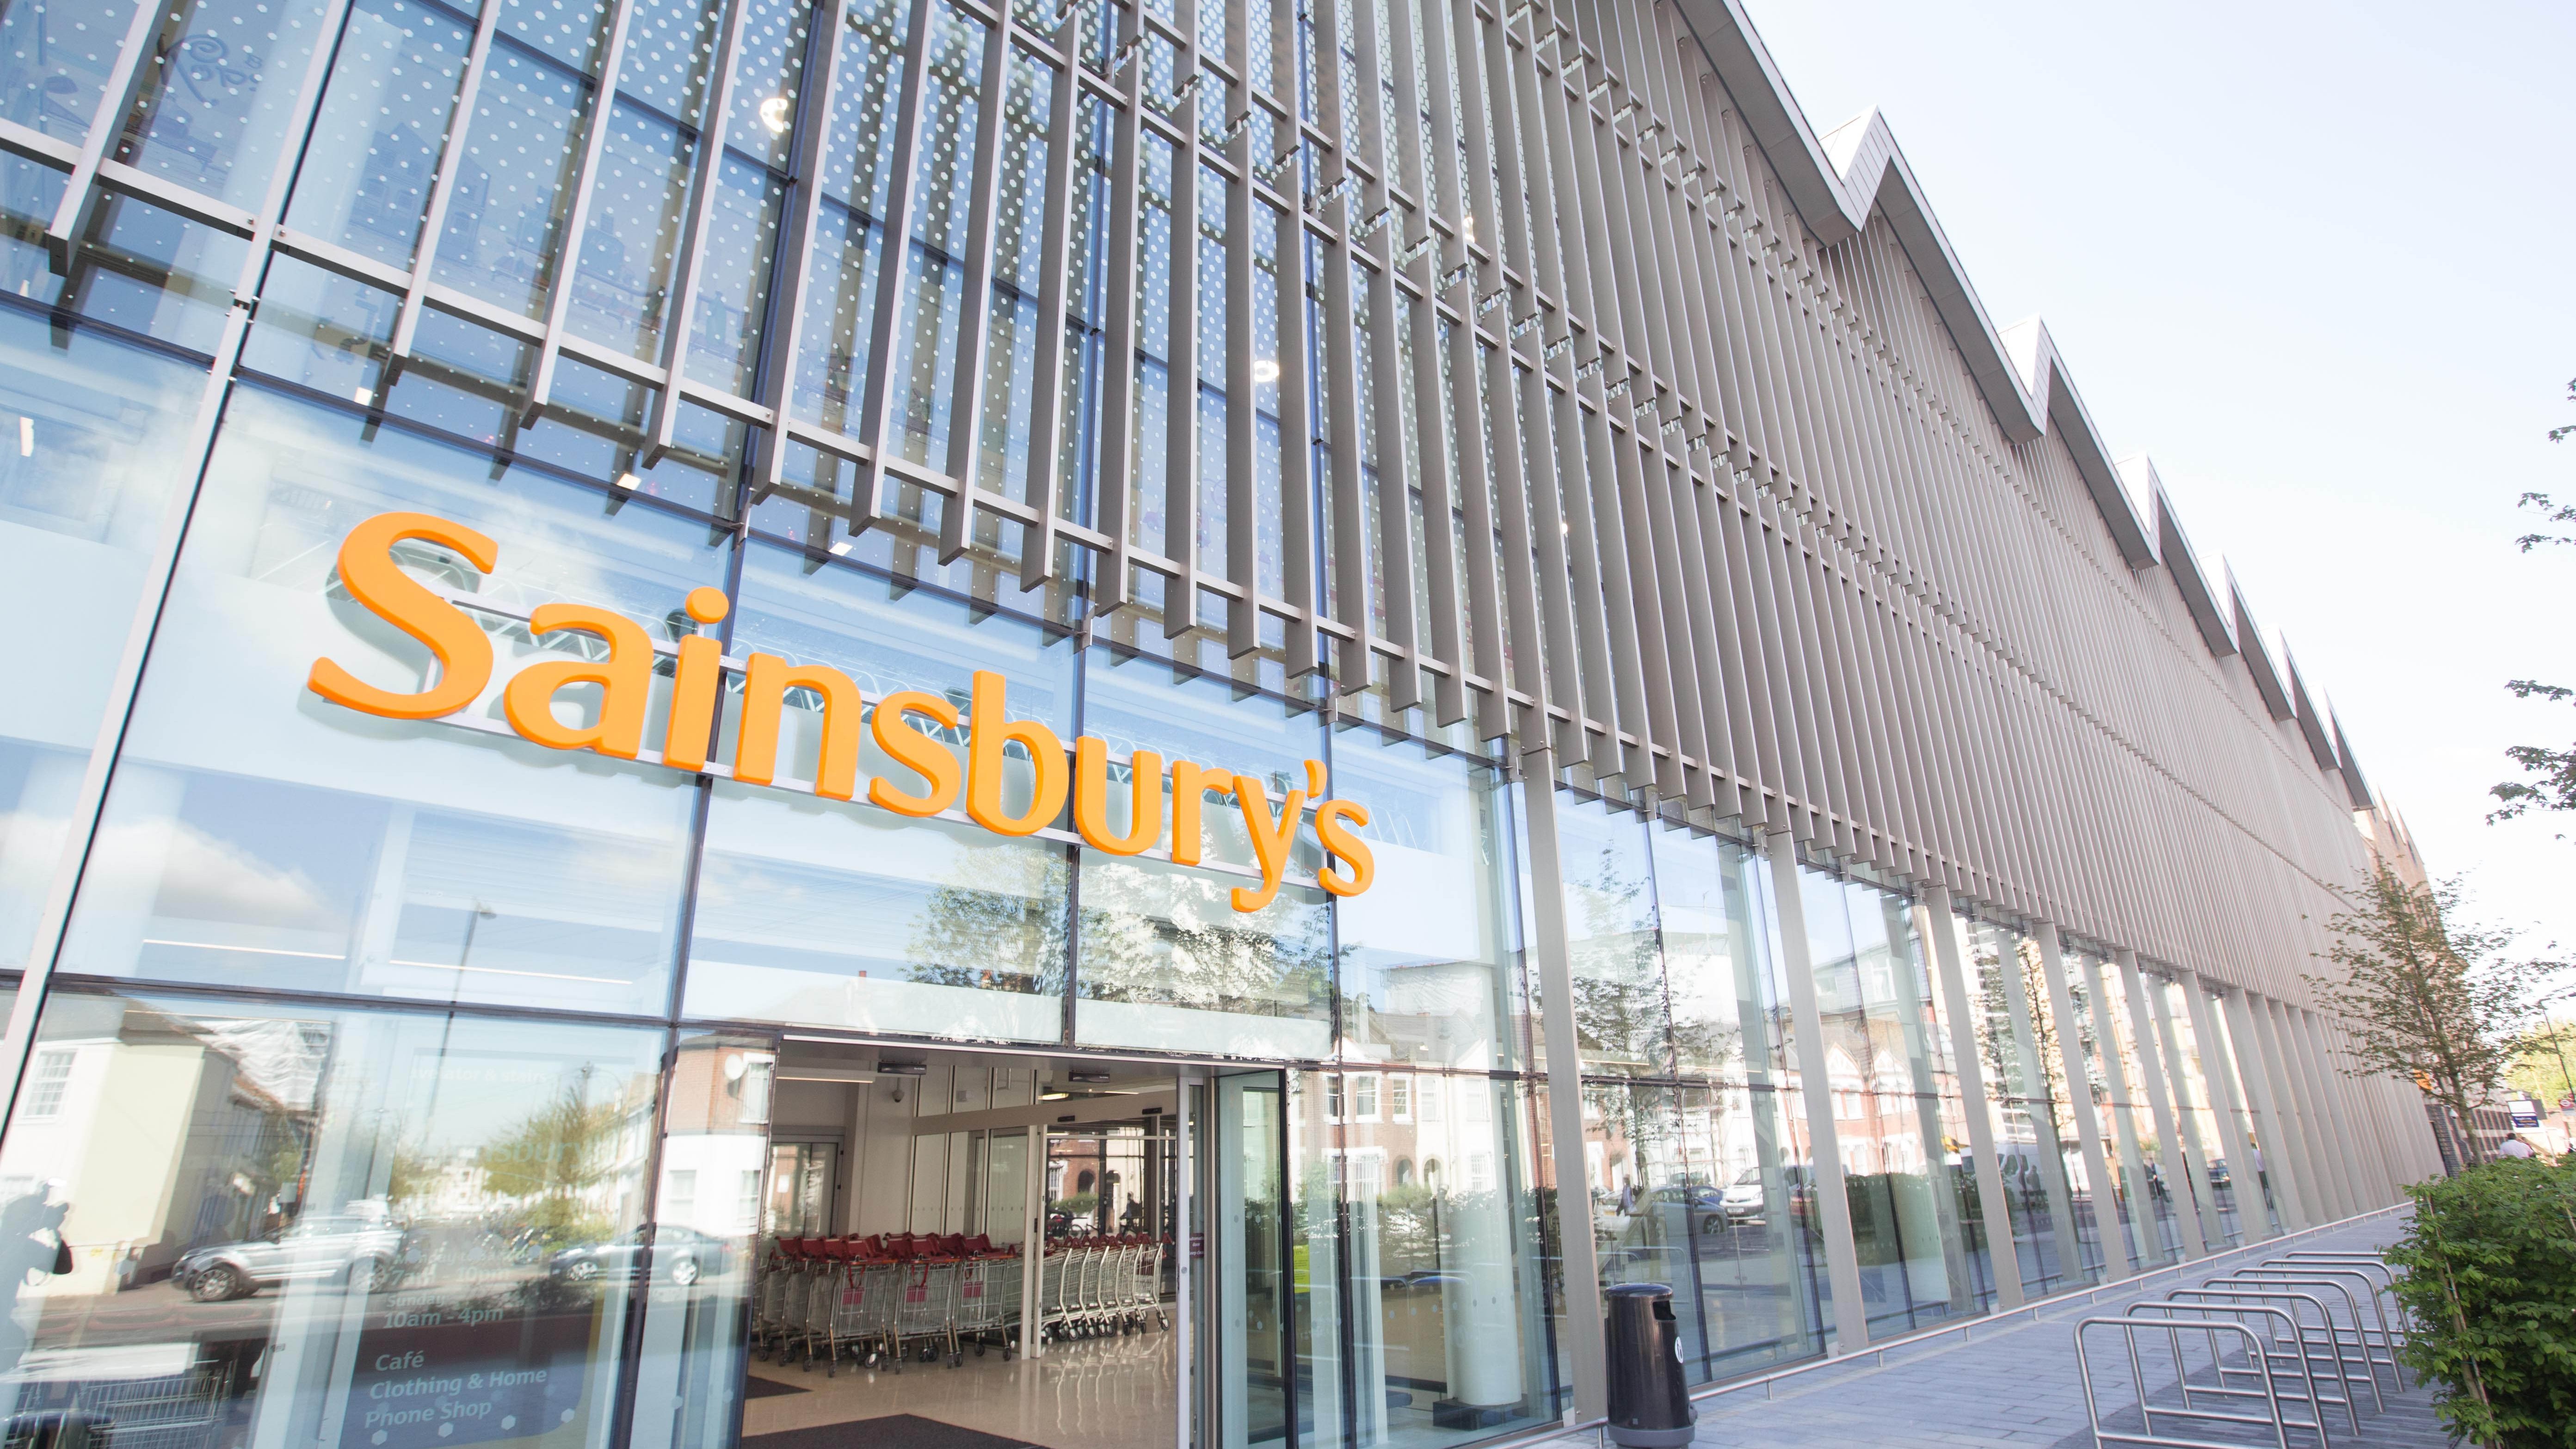 [Translate to Português:] Sainsbury's is transforming its logistics and fulfillment network with Körber's warehouse management system.